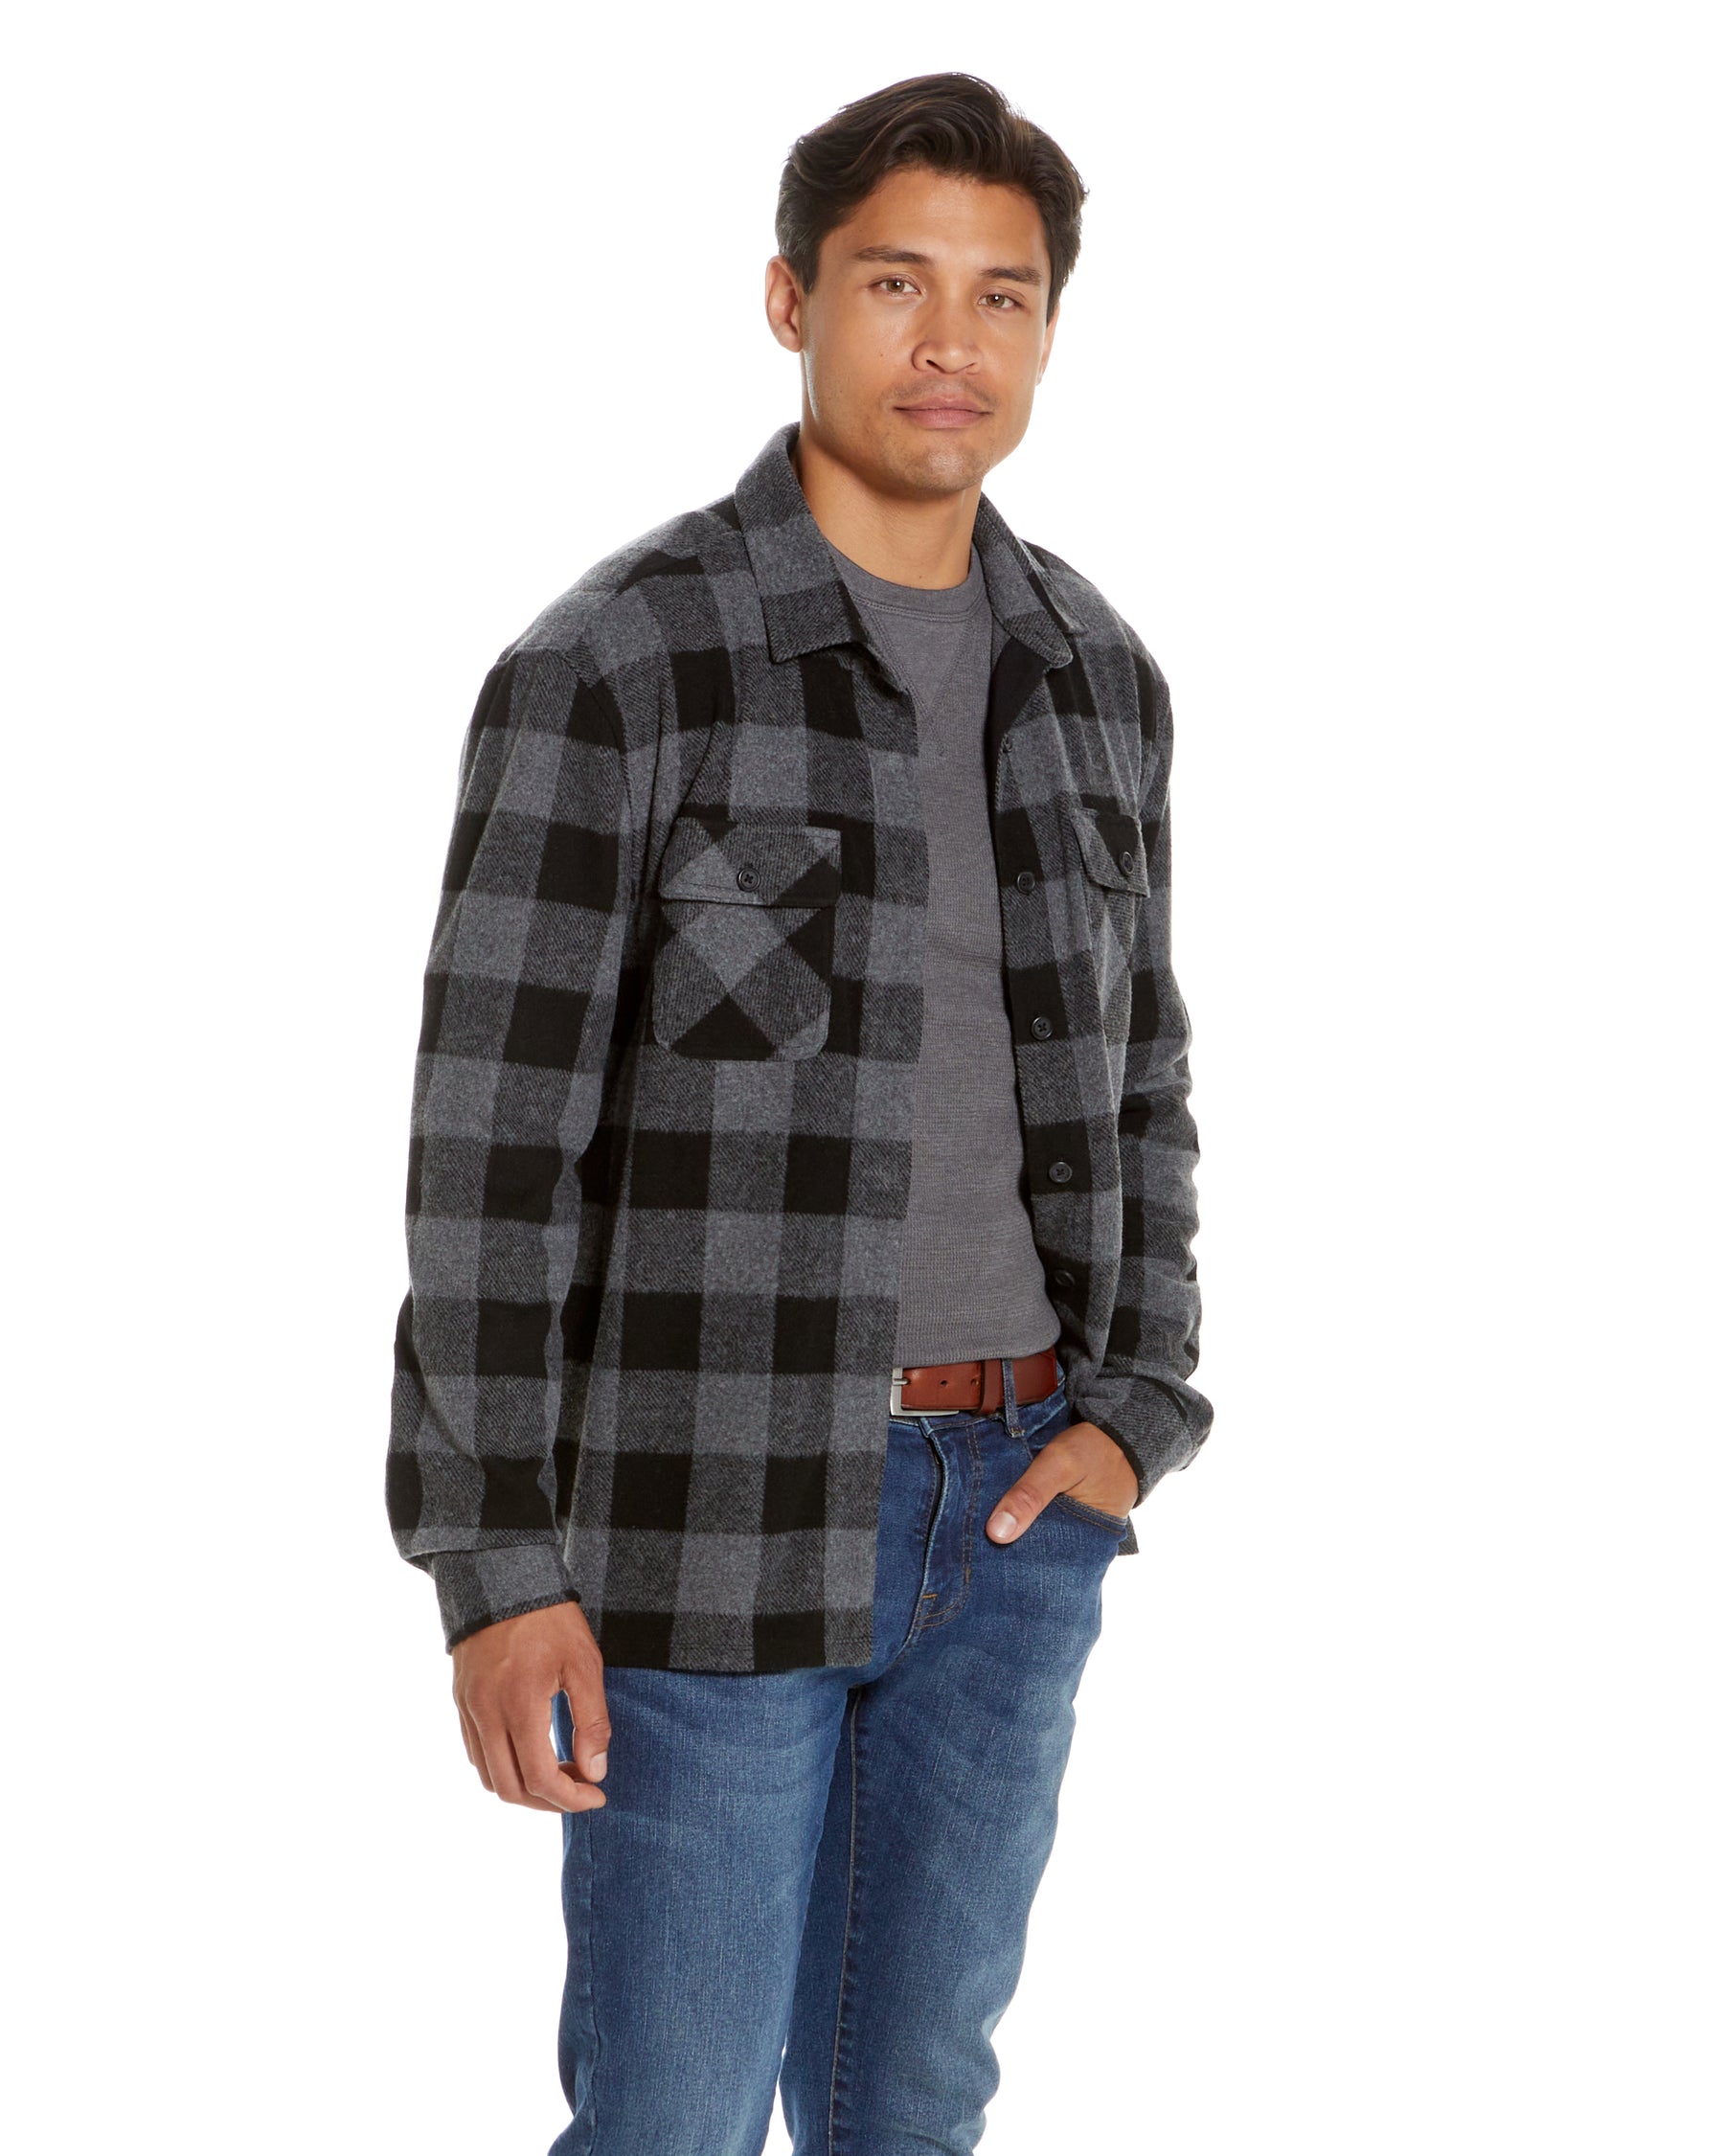 Long Sleeve Black Flannel Shirt Combo Layering Piece with Magnetic Closures